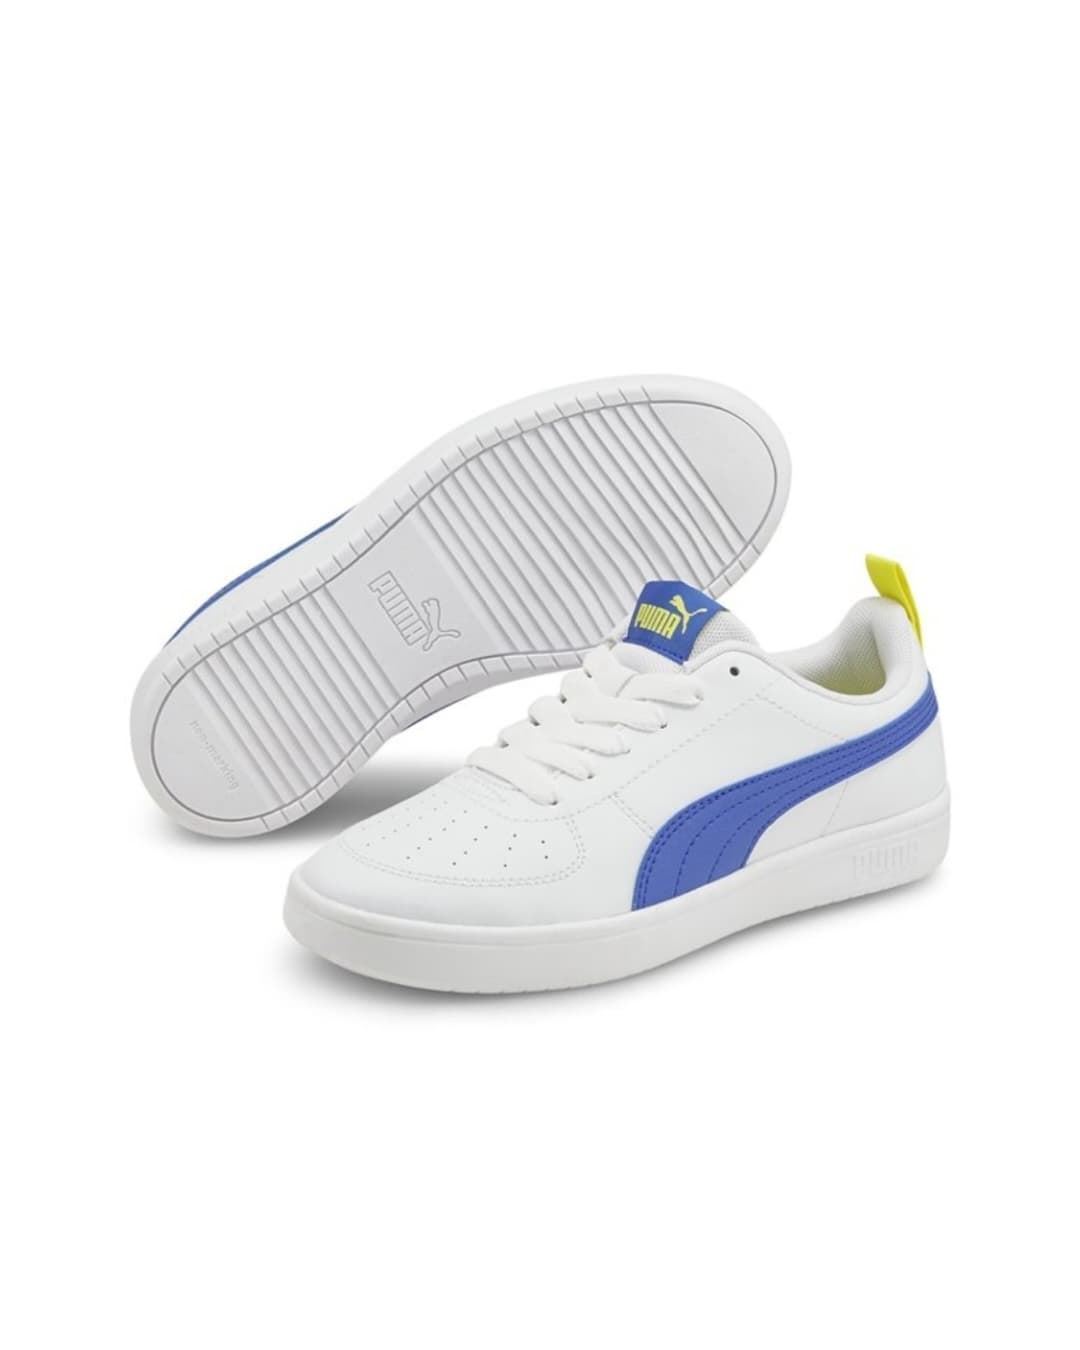 Puma Rickie Jr Sneakers White Blue with lace - Image 1